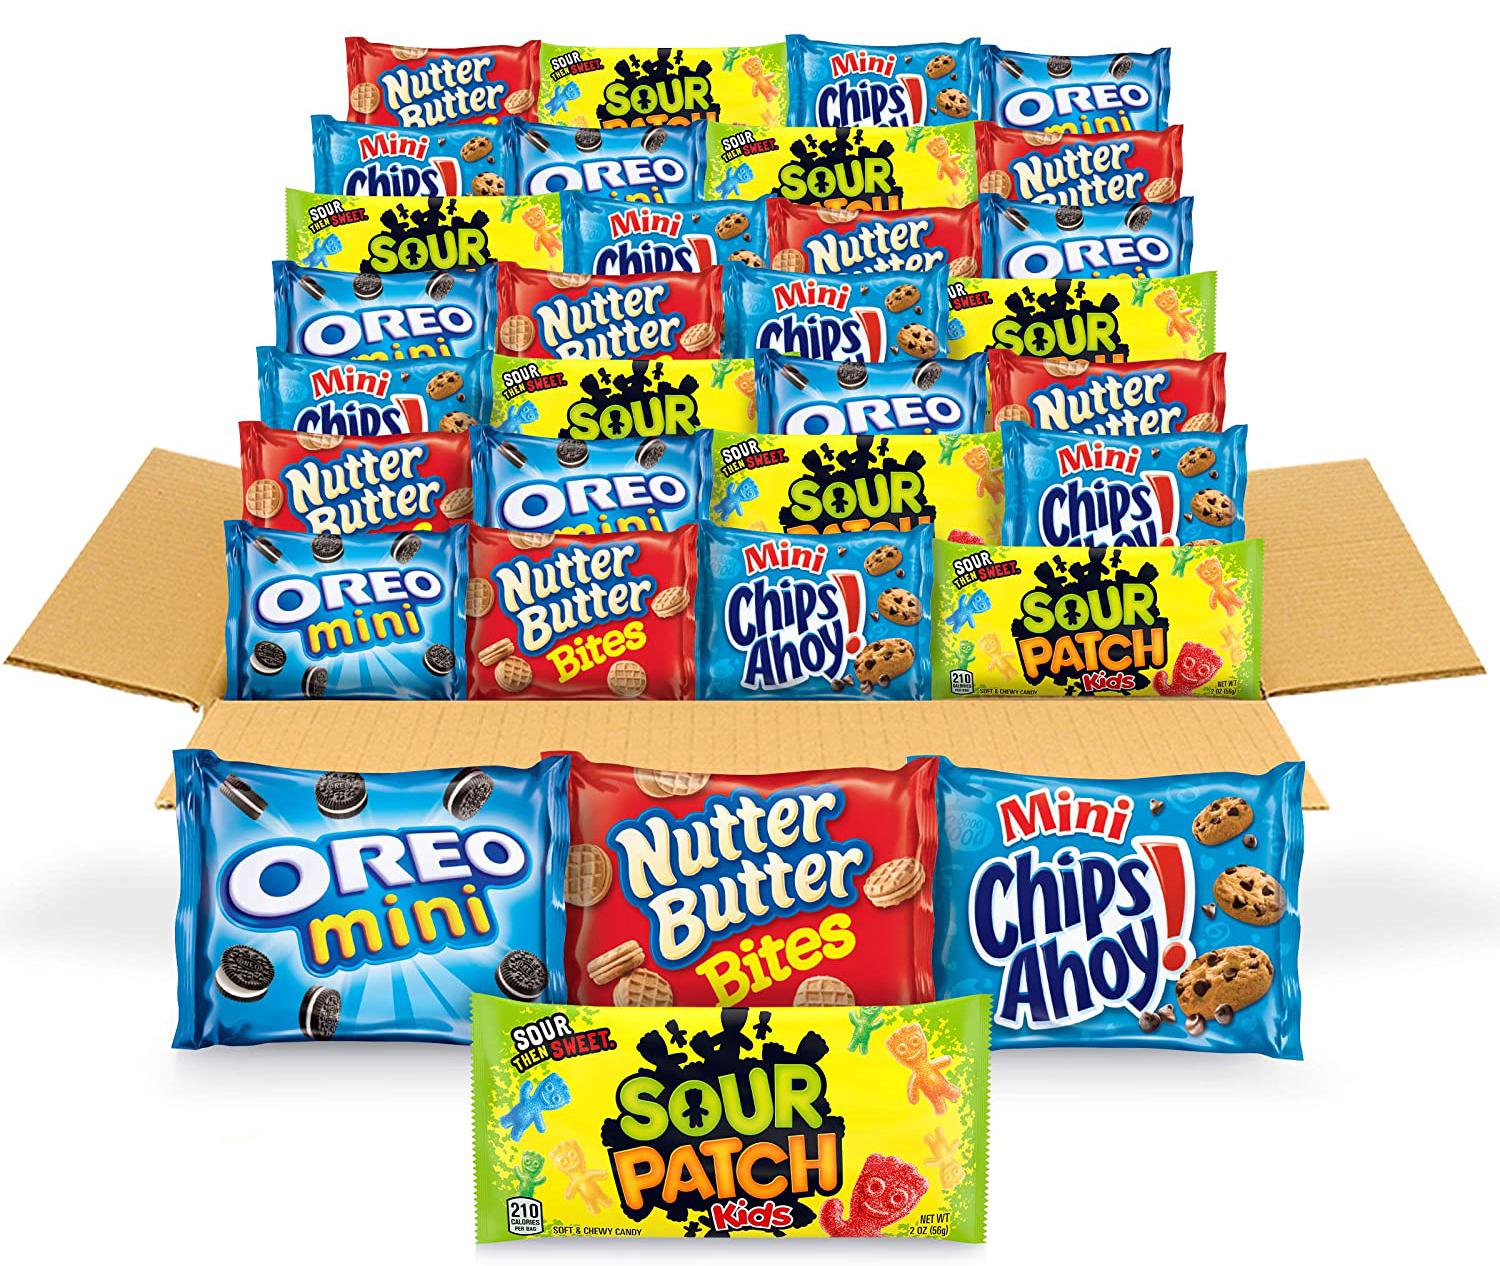 32 Oreo Mini Cookies Snack Variety Pack for $12